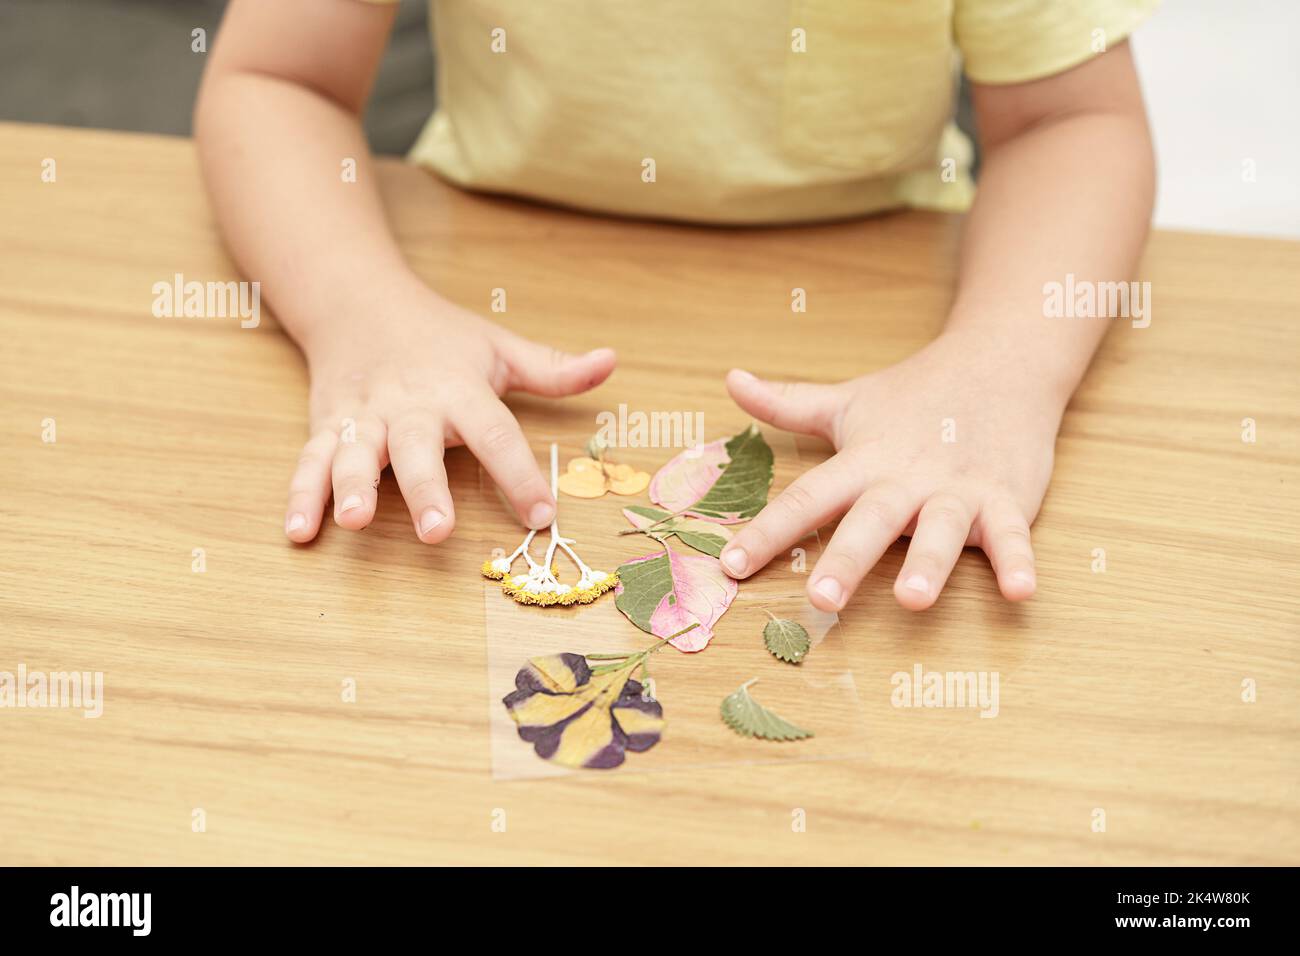 Faceless kid arranging pressed flowers on the glass picture frame. Child making picture from pressed flowers on herbarium f.rame. Stock Photo